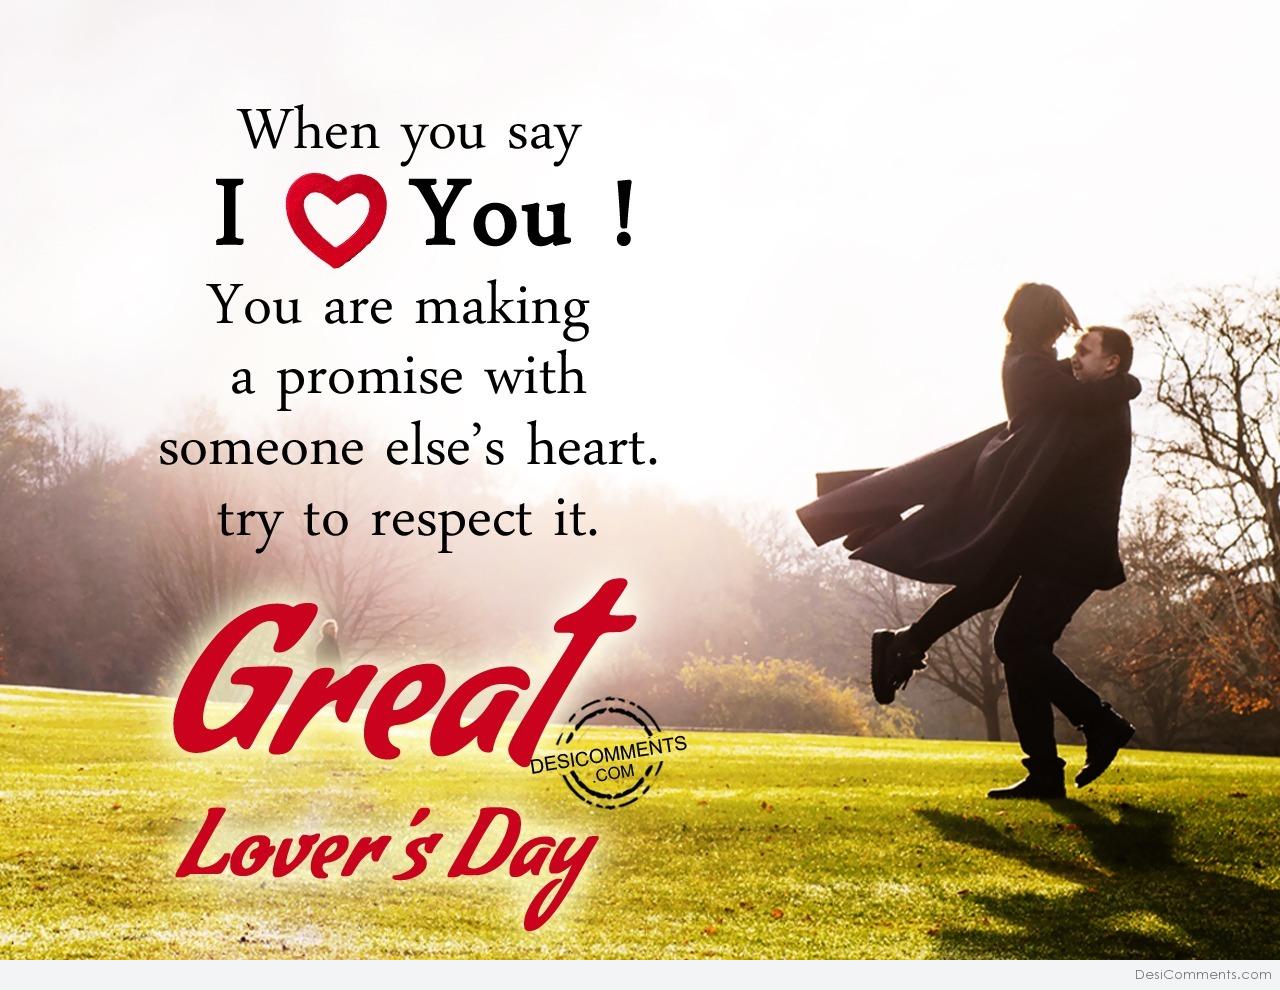 You say I love you, Happy great lovers day - DesiComments.com